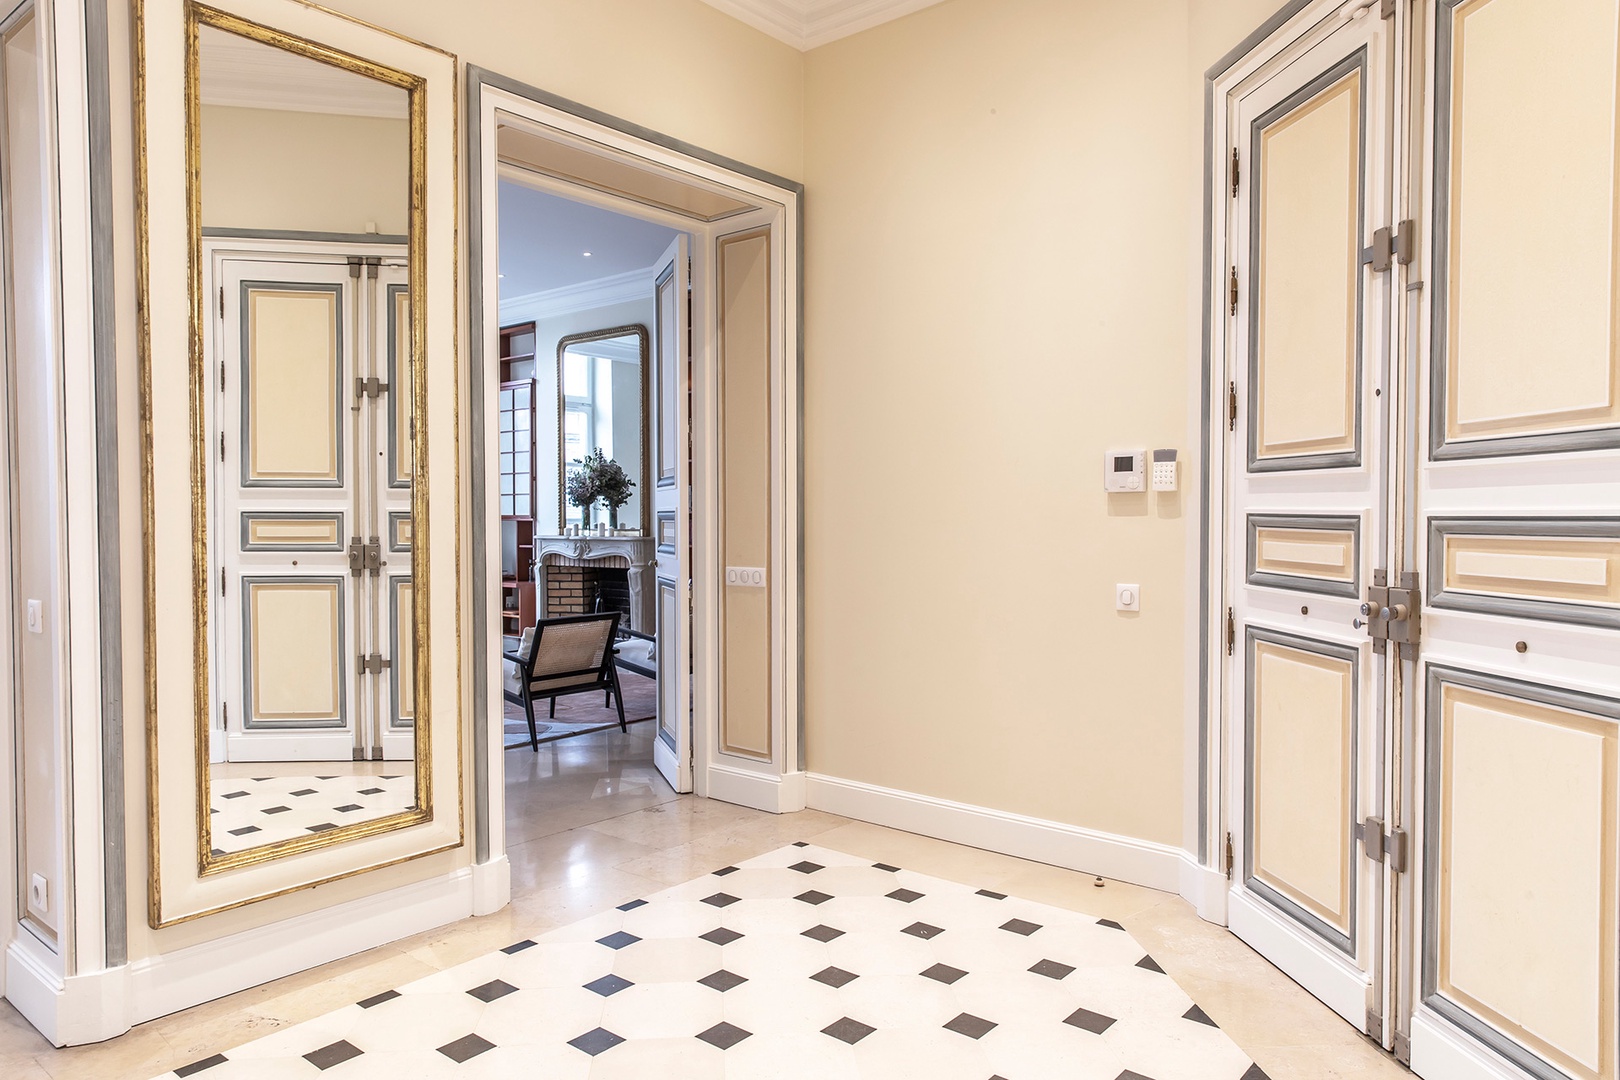 Elegant marble lined entryway welcomes you home.